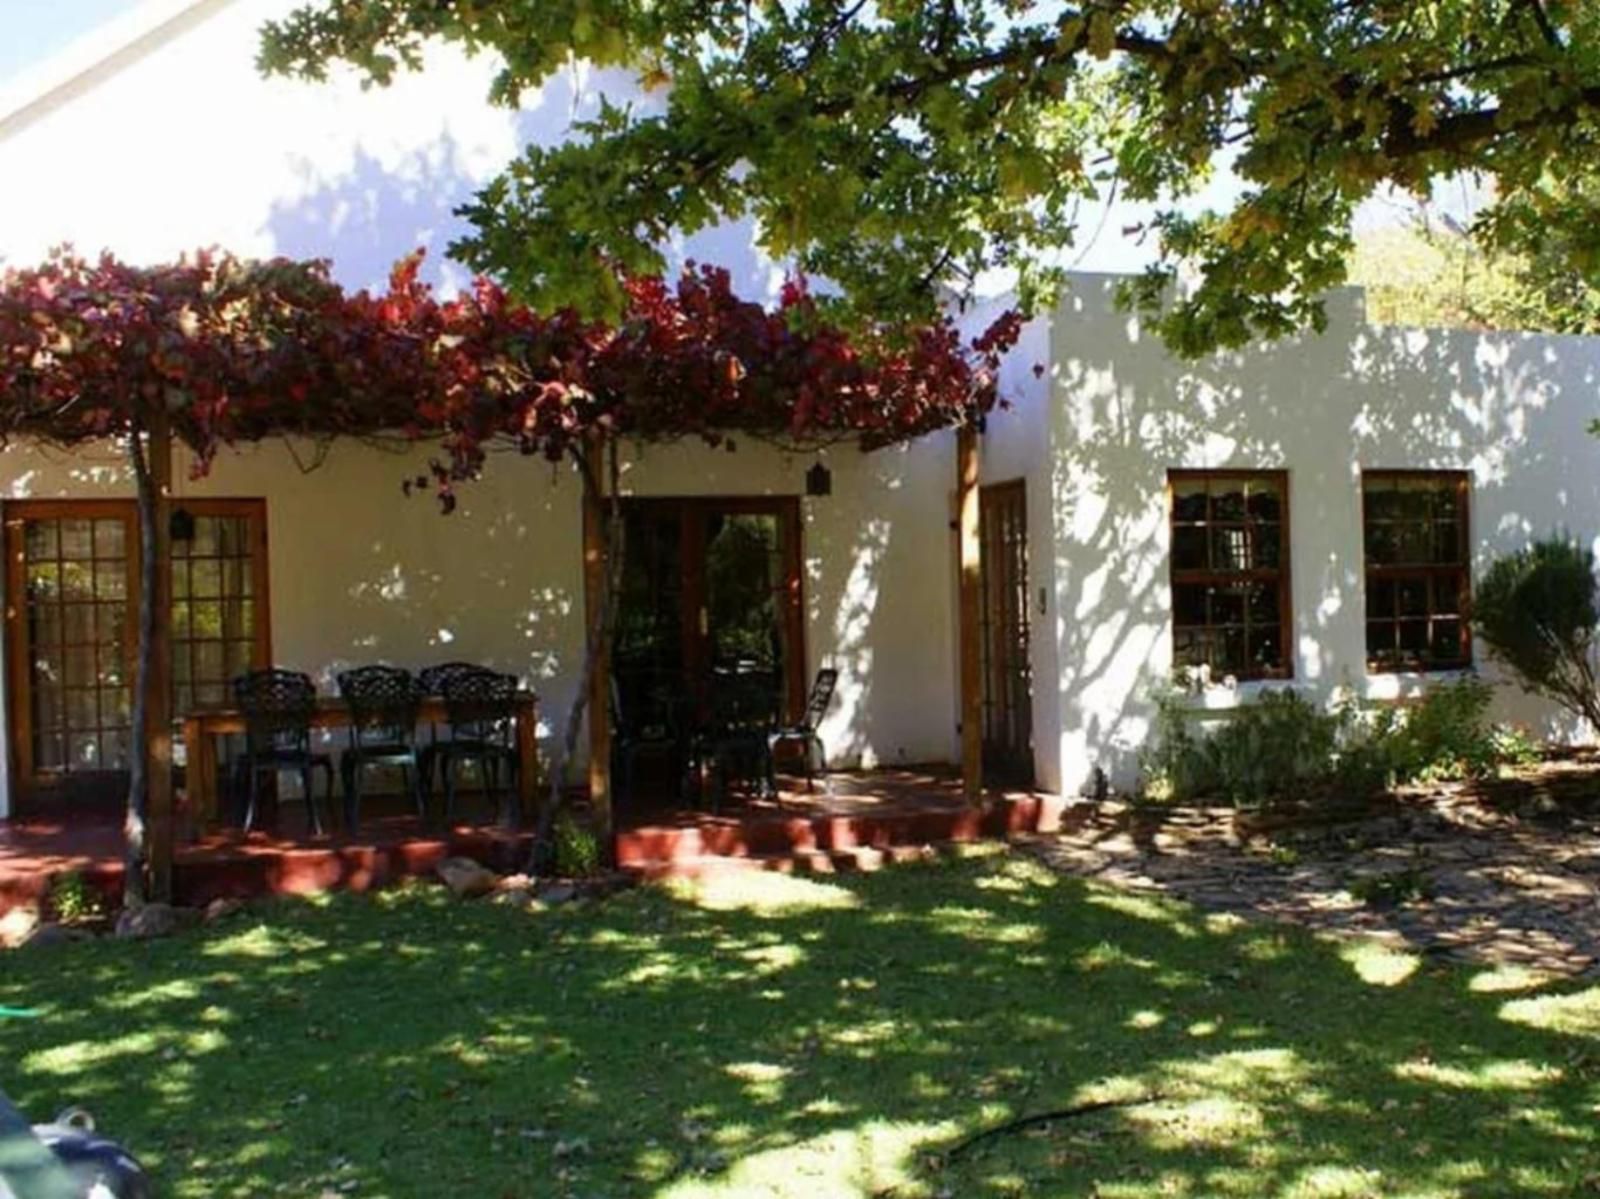 Tierhoek Cottages Robertson Western Cape South Africa House, Building, Architecture